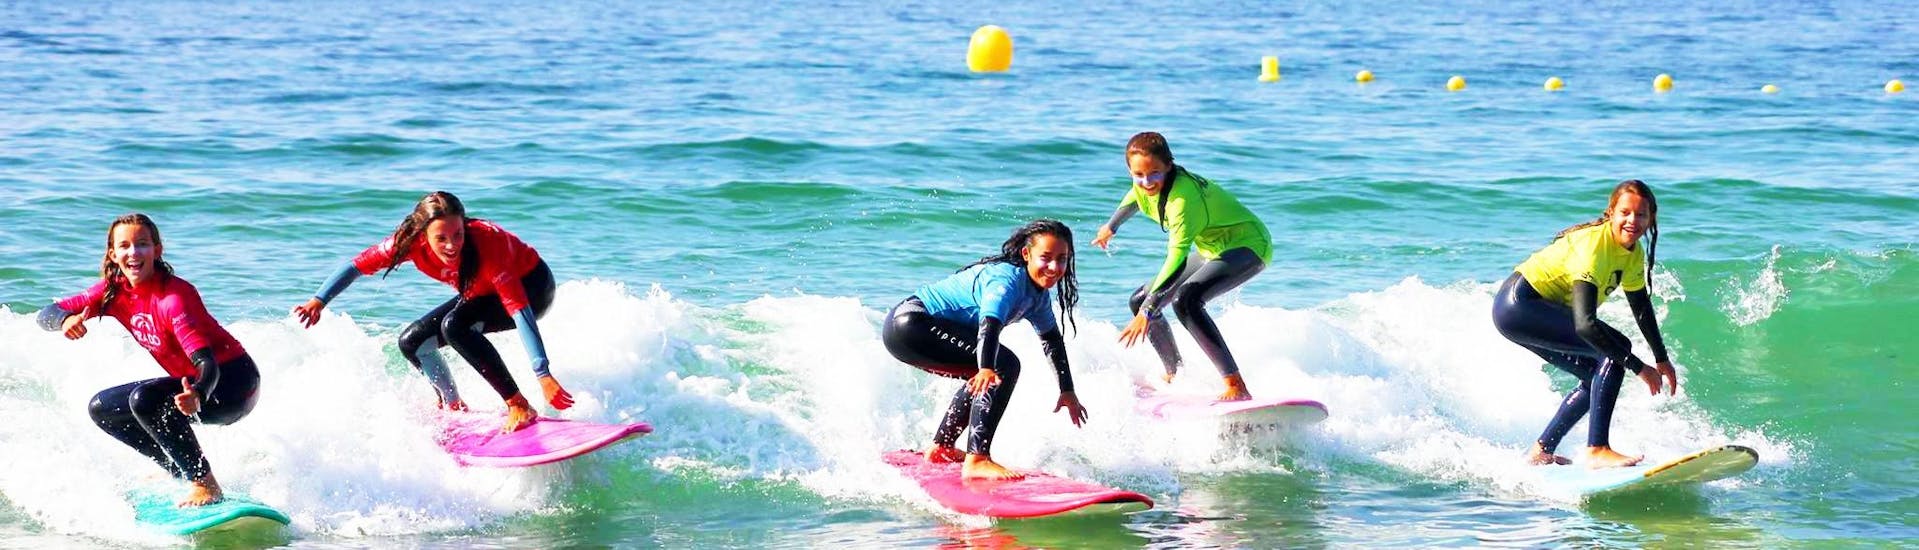 A group of surfers are visibly having fun surfing the gentle waves during their Surfing Lessons at Playa de Sabón for all Levels, organized by Prado Surf.